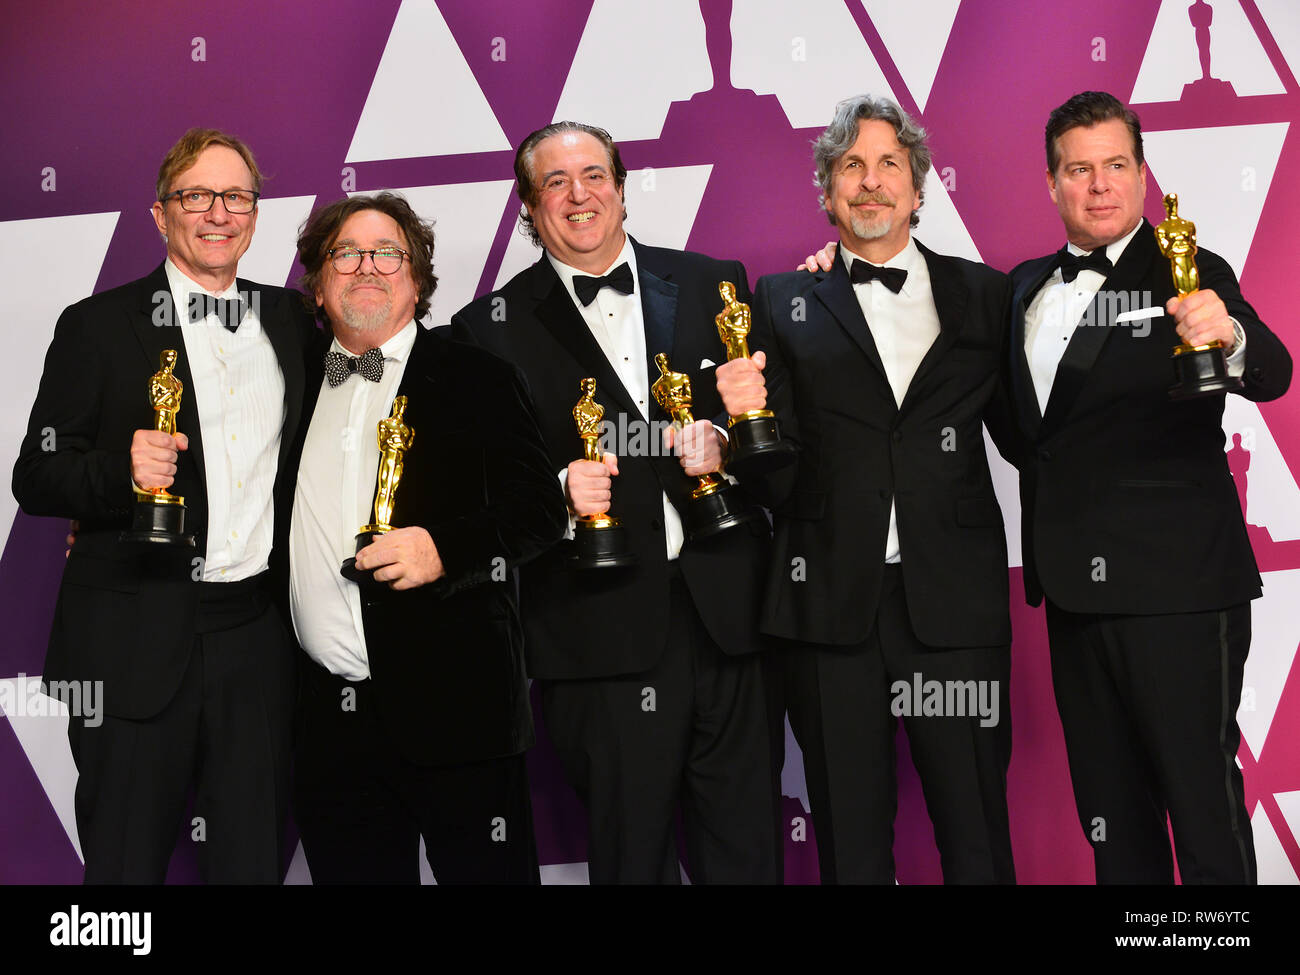 Jm Burke, Charles B. Wessler, Nick Vallelonga, Peter Farrelly and Brian Currie pose with the Best Picture and Best Original Screenplay award for Green Book 040 at the 91st Annual Academy Awards in the press room during at Hollywood and Highland on February 24, 2019 in Hollywood, California Stock Photo